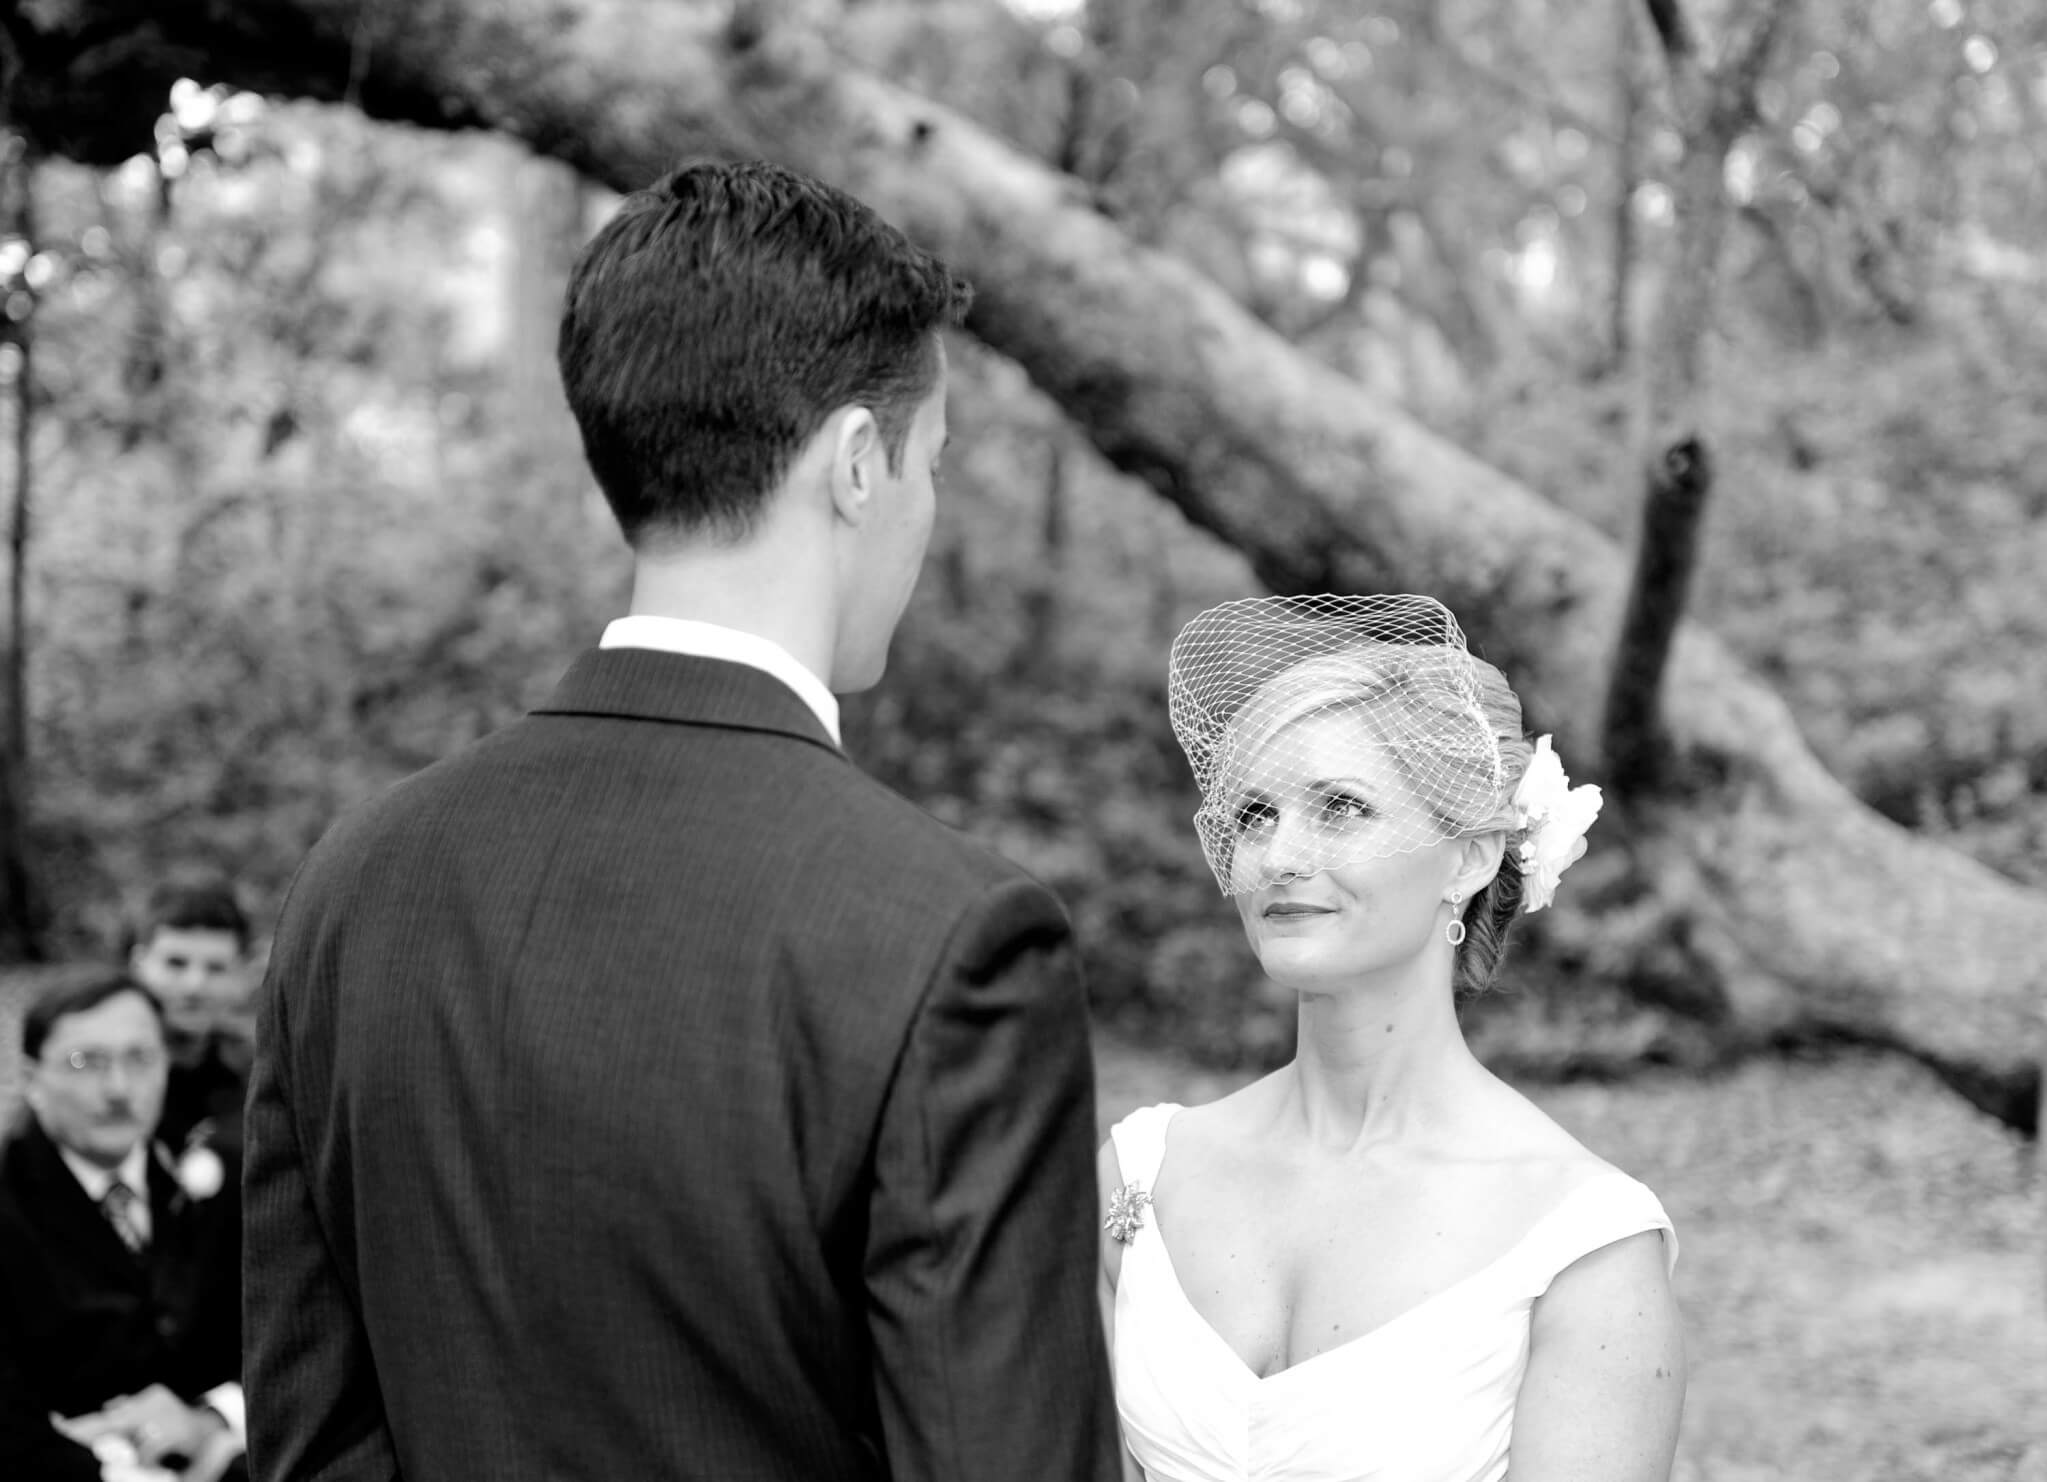 Giving the vows - black and white